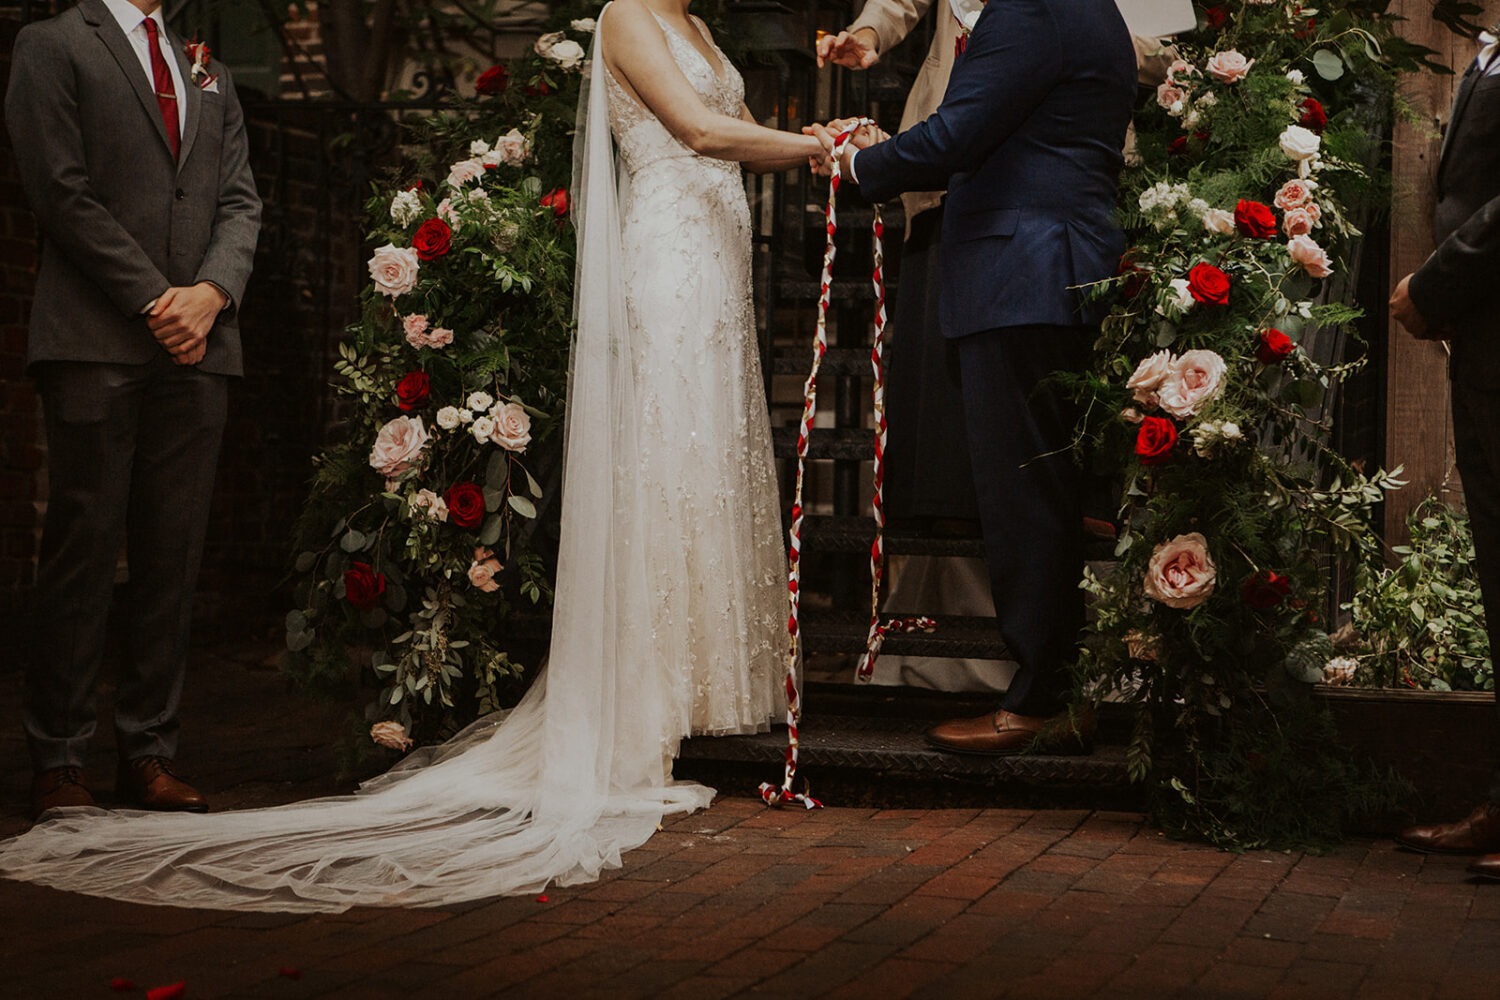 couple exchanges vows with wedding rope during ceremony 